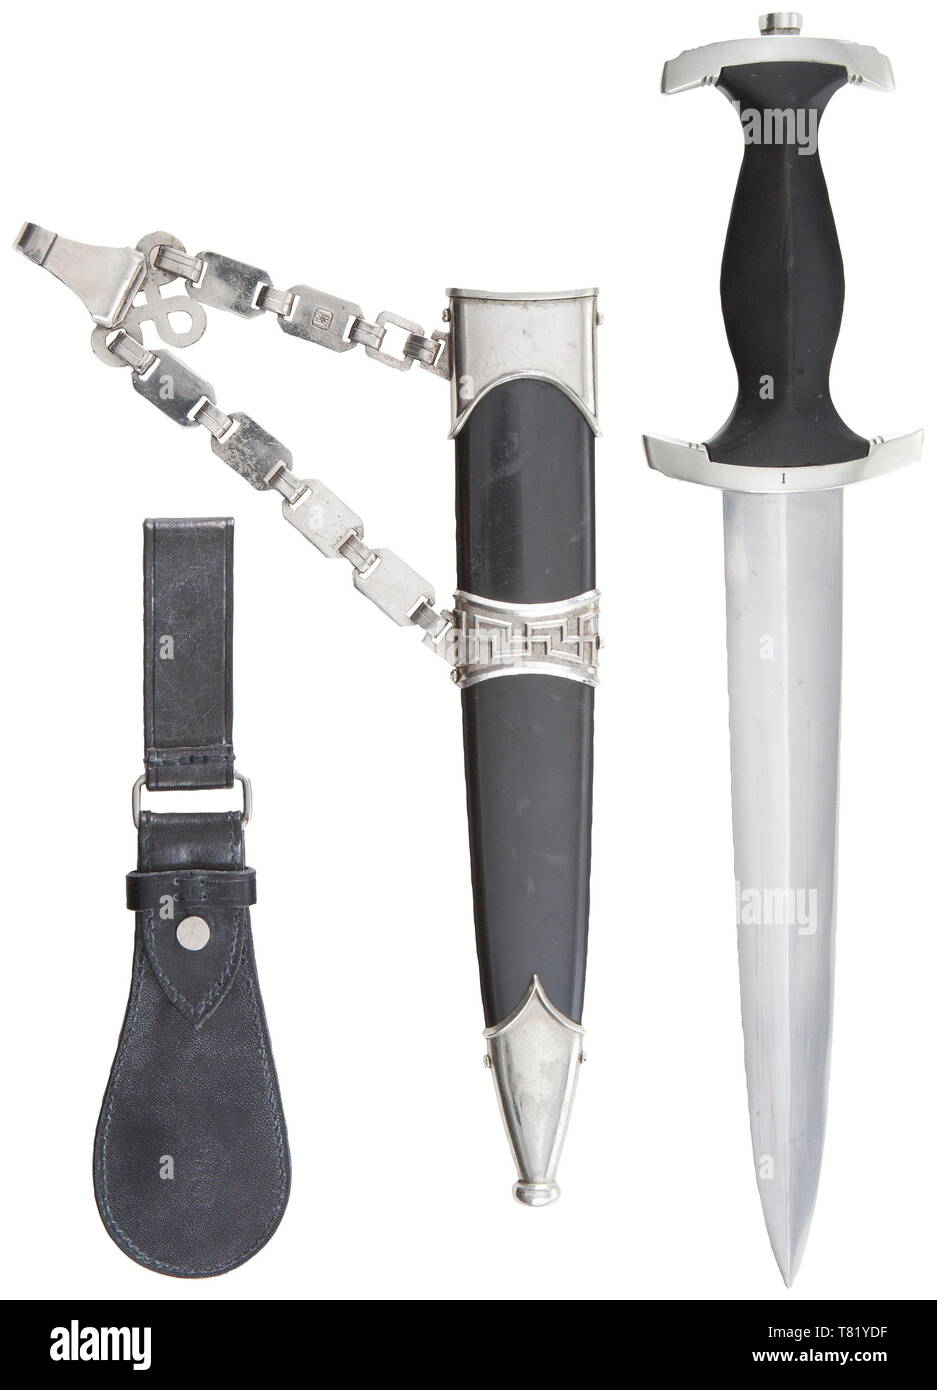 A service dagger M 36 with chain hanger and tear drop belt loop. The blade with etched motto, nickel-silver cross-guards, lower reverse stamped 'I'. Black wooden grip with inset nickel-silver eagle and enamelled SS emblem. Black burnished steel scabbard retaining most of factory lacquer. Plated chain with typical 'SS' stamping. Complete with a two-piece black leather tear drop hanger with faint marking 'SS 1/36 RZM'. Length 36.5 cm. USA-Lot historic, historical, 20th century, 1930s, 1940s, Waffen-SS, armed division of the SS, armed service, armed services, NS, National Soci, Editorial-Use-Only Stock Photo